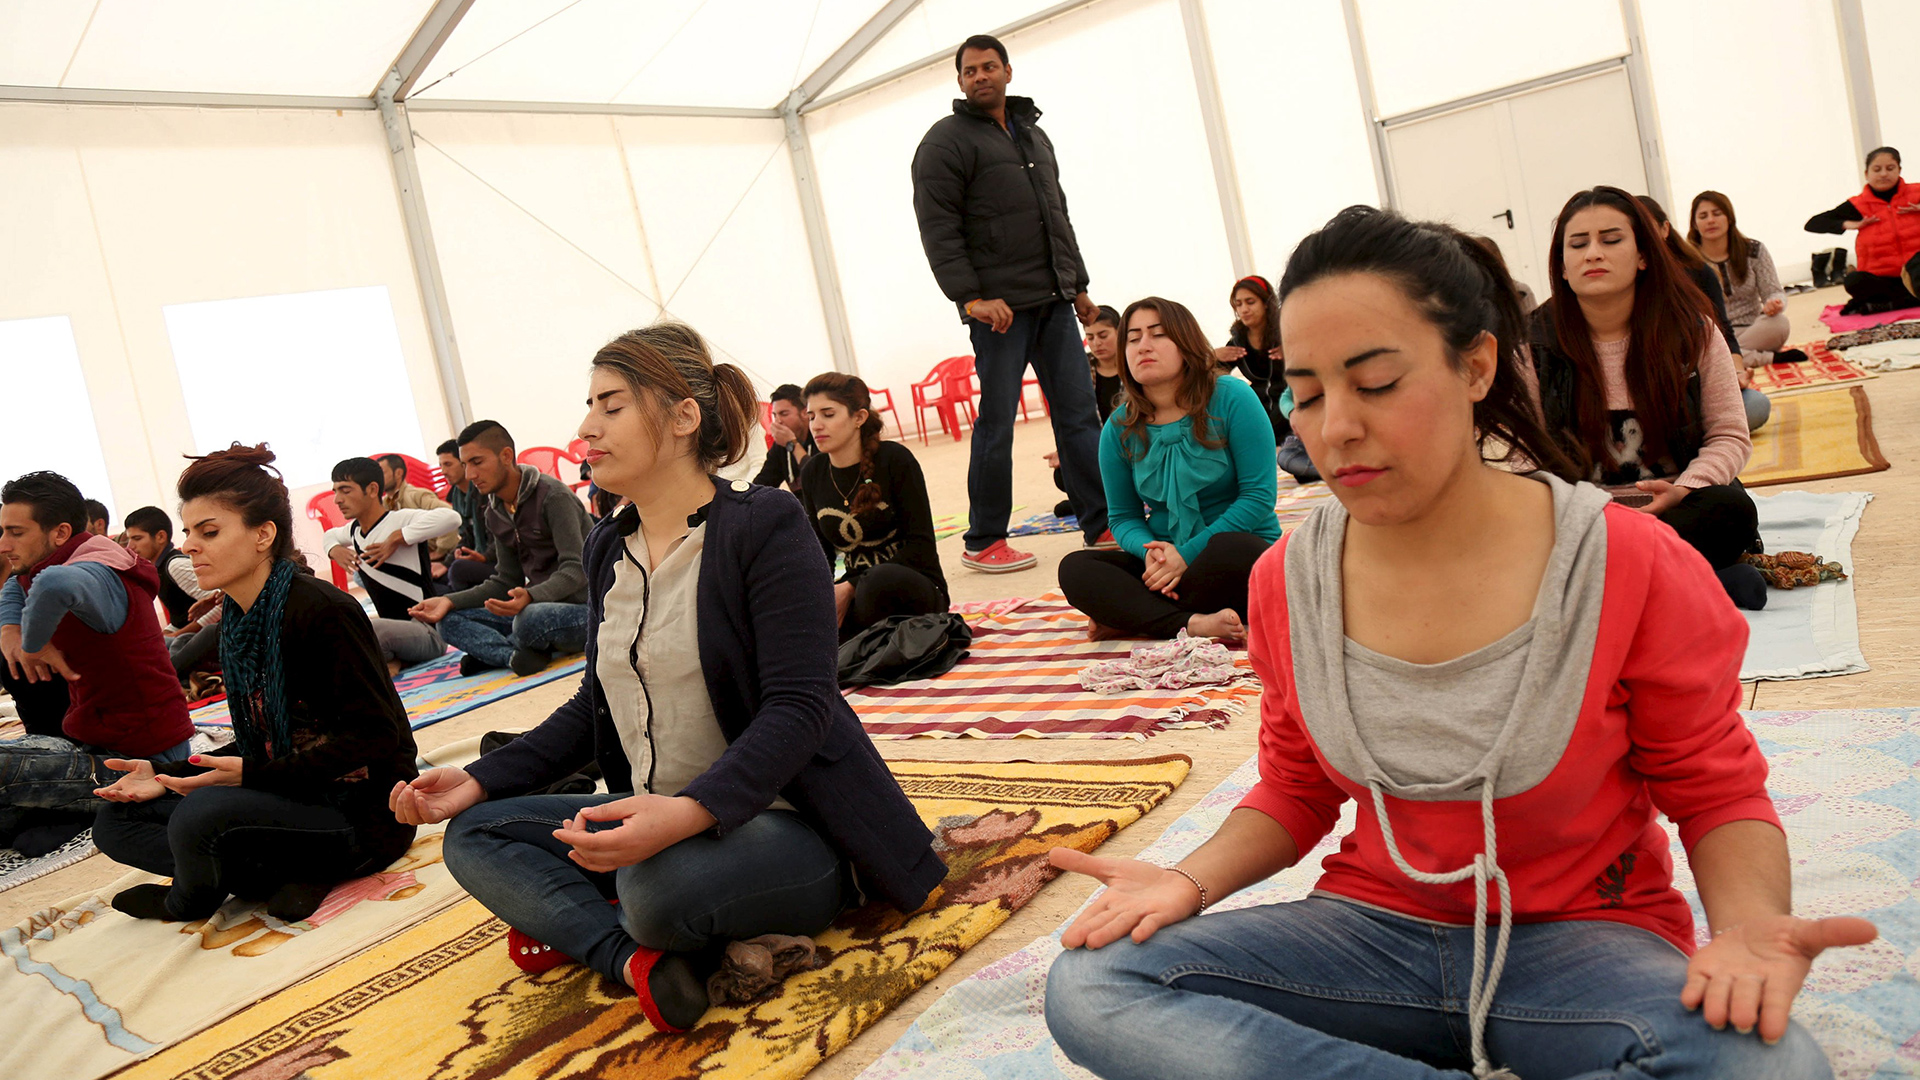 Yoga for the displaced